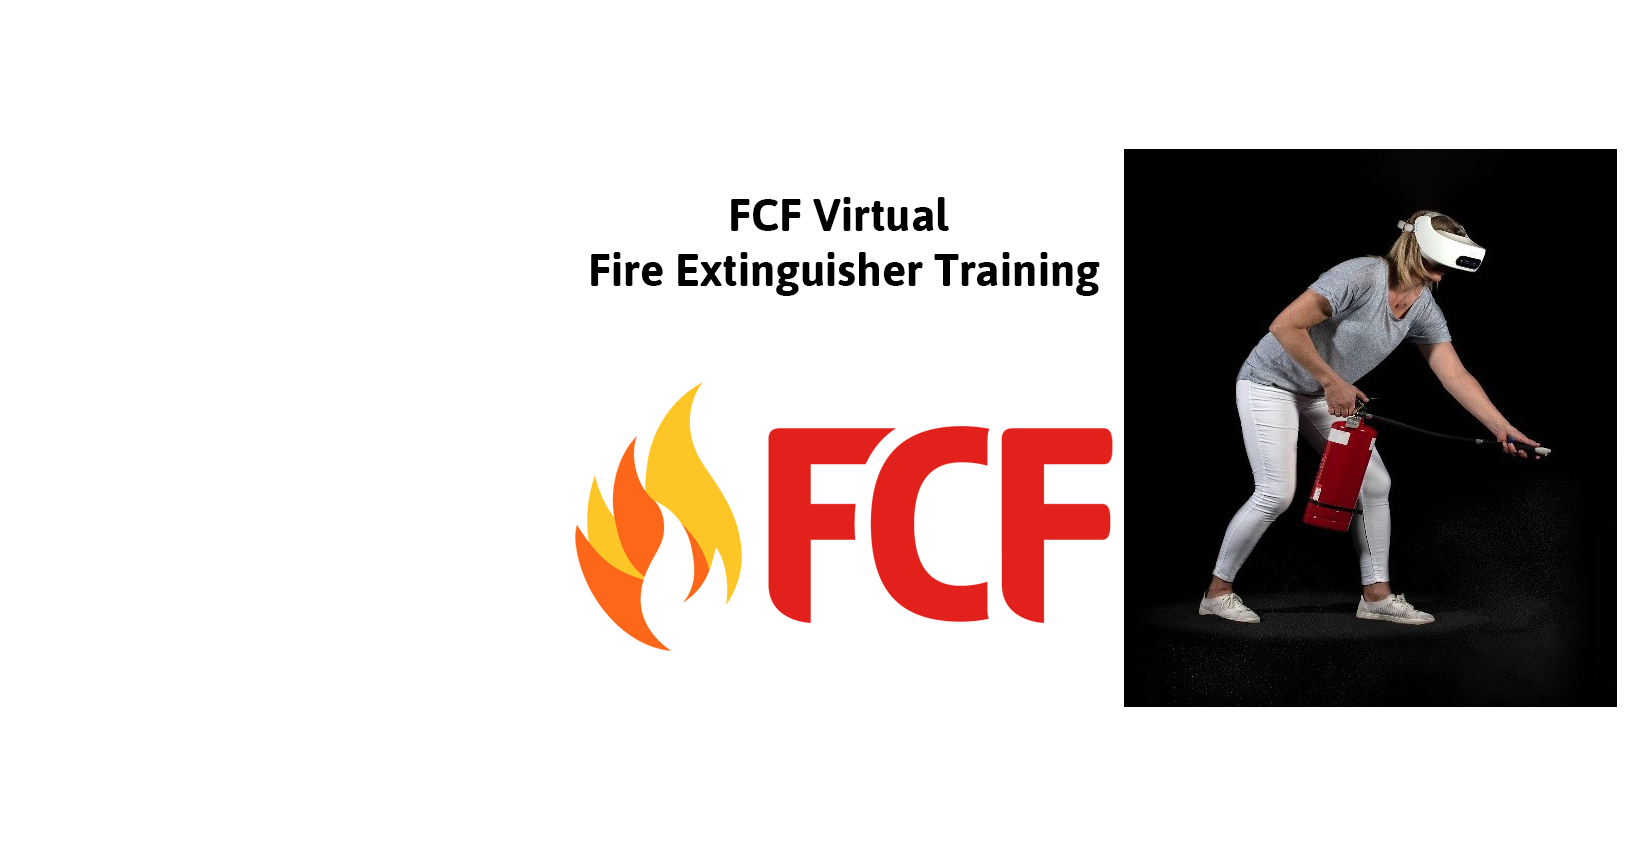 VR Fire Training: Taking Fire Safety Training to the Next Level